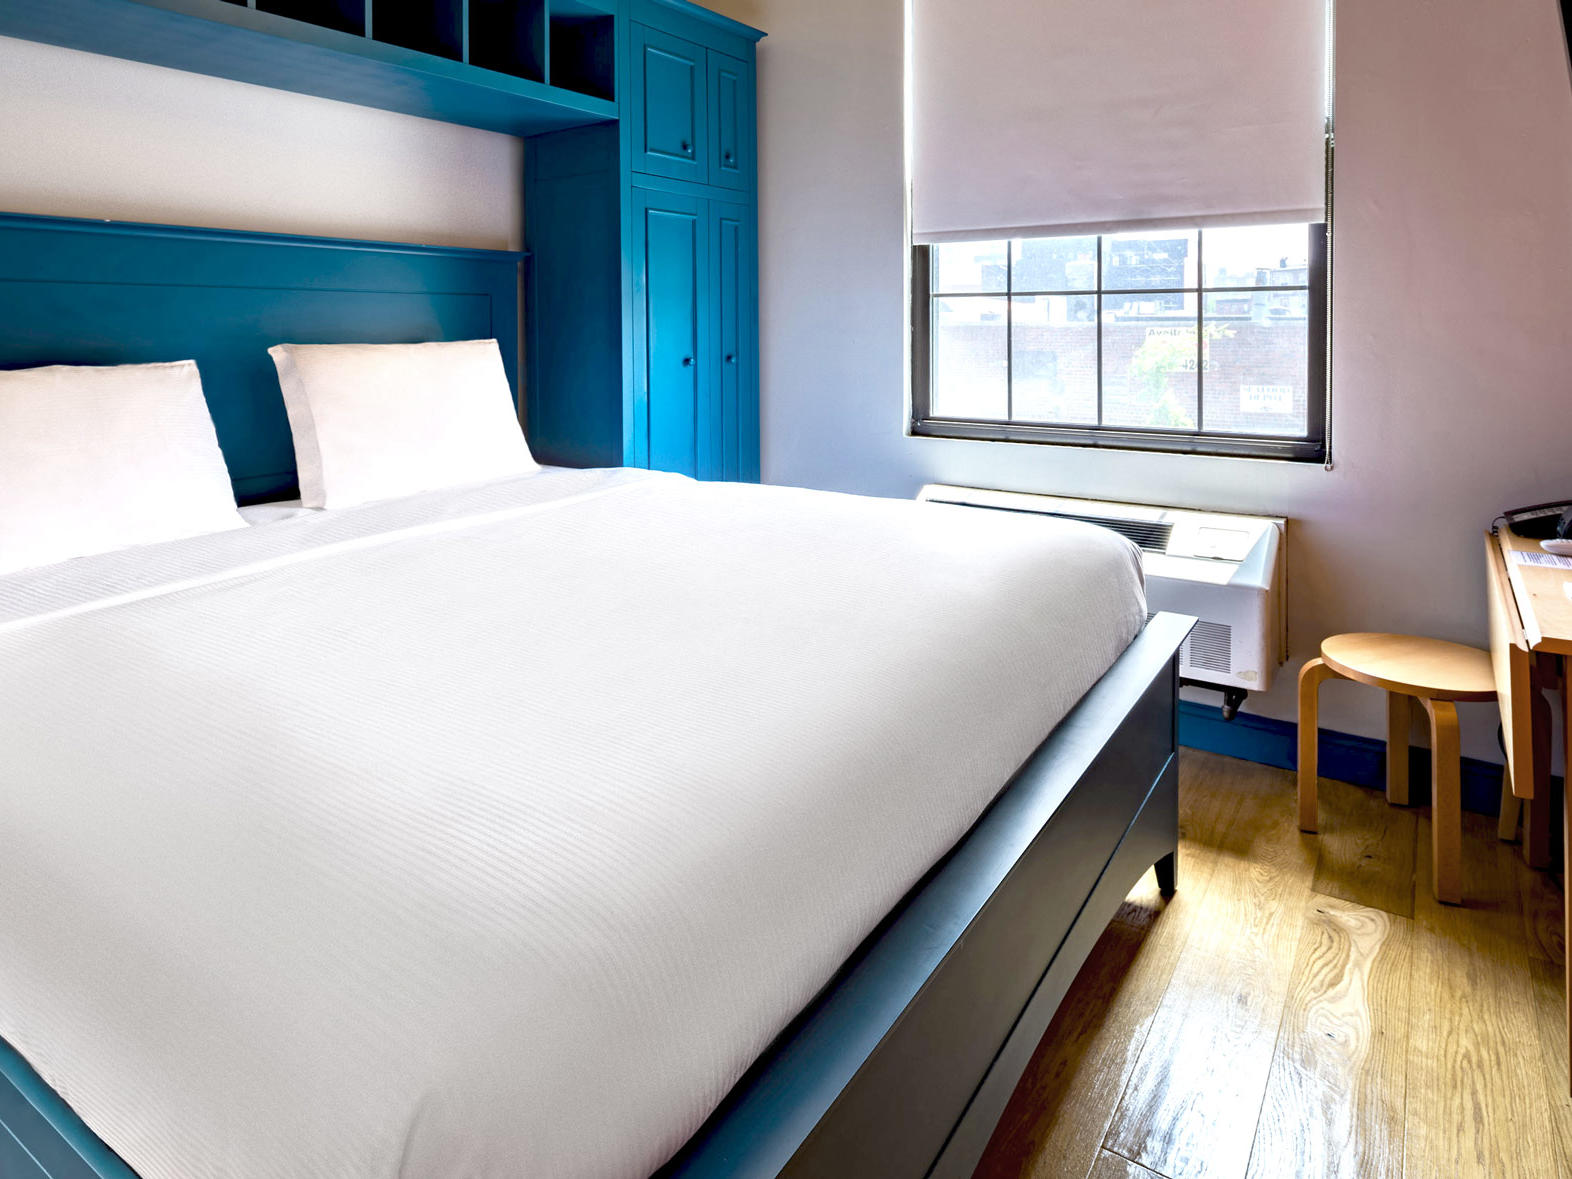 King bed and blue frame in hotel room with window